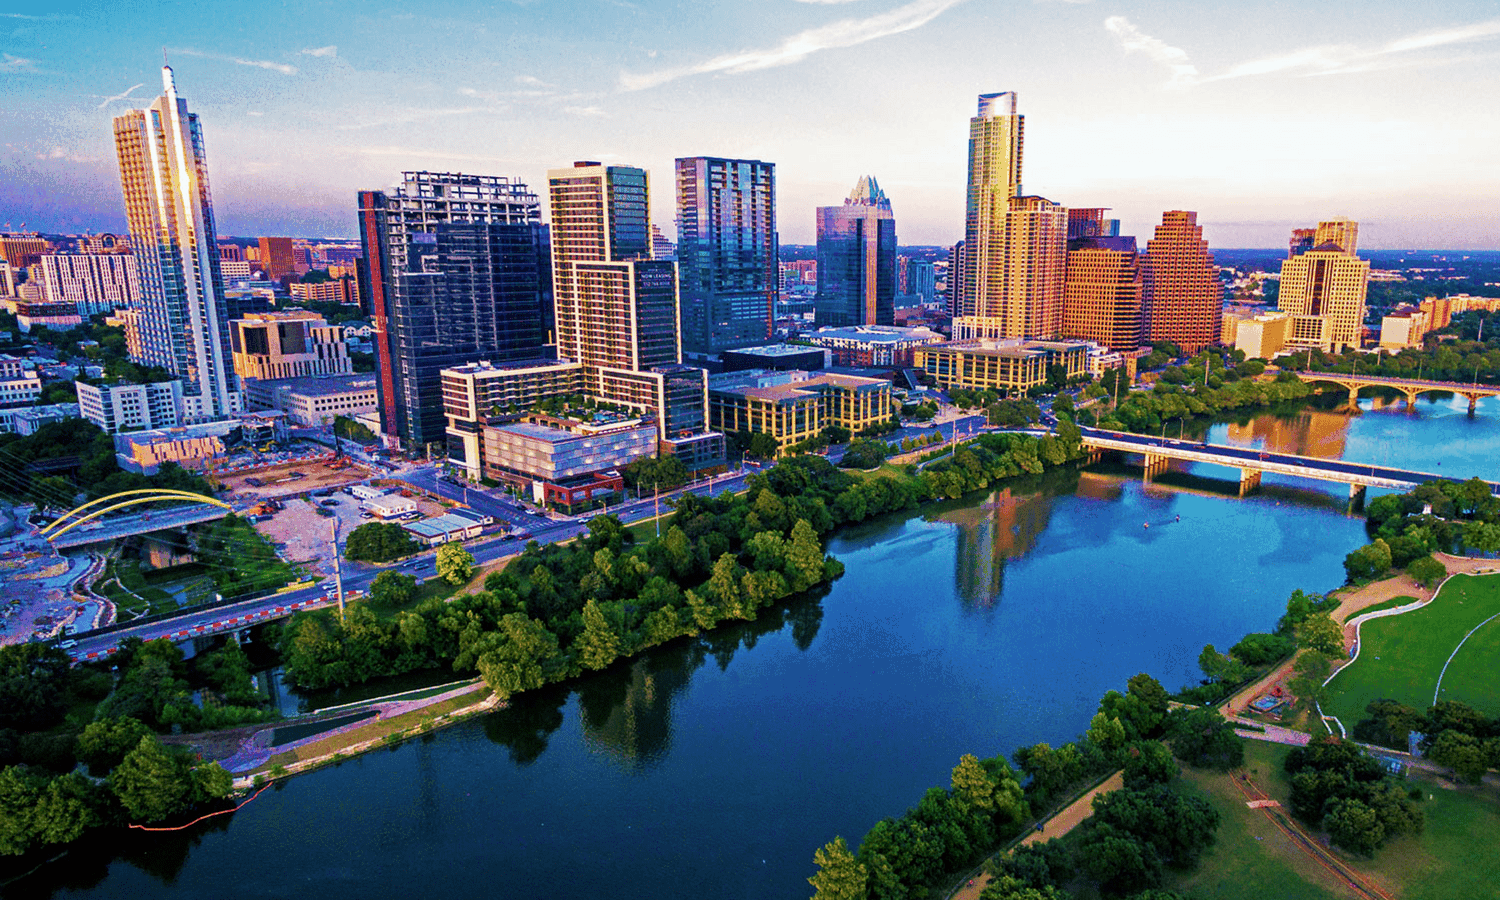 Austin attracting businesses with its economic advantages, diverse talent pool and quality of life